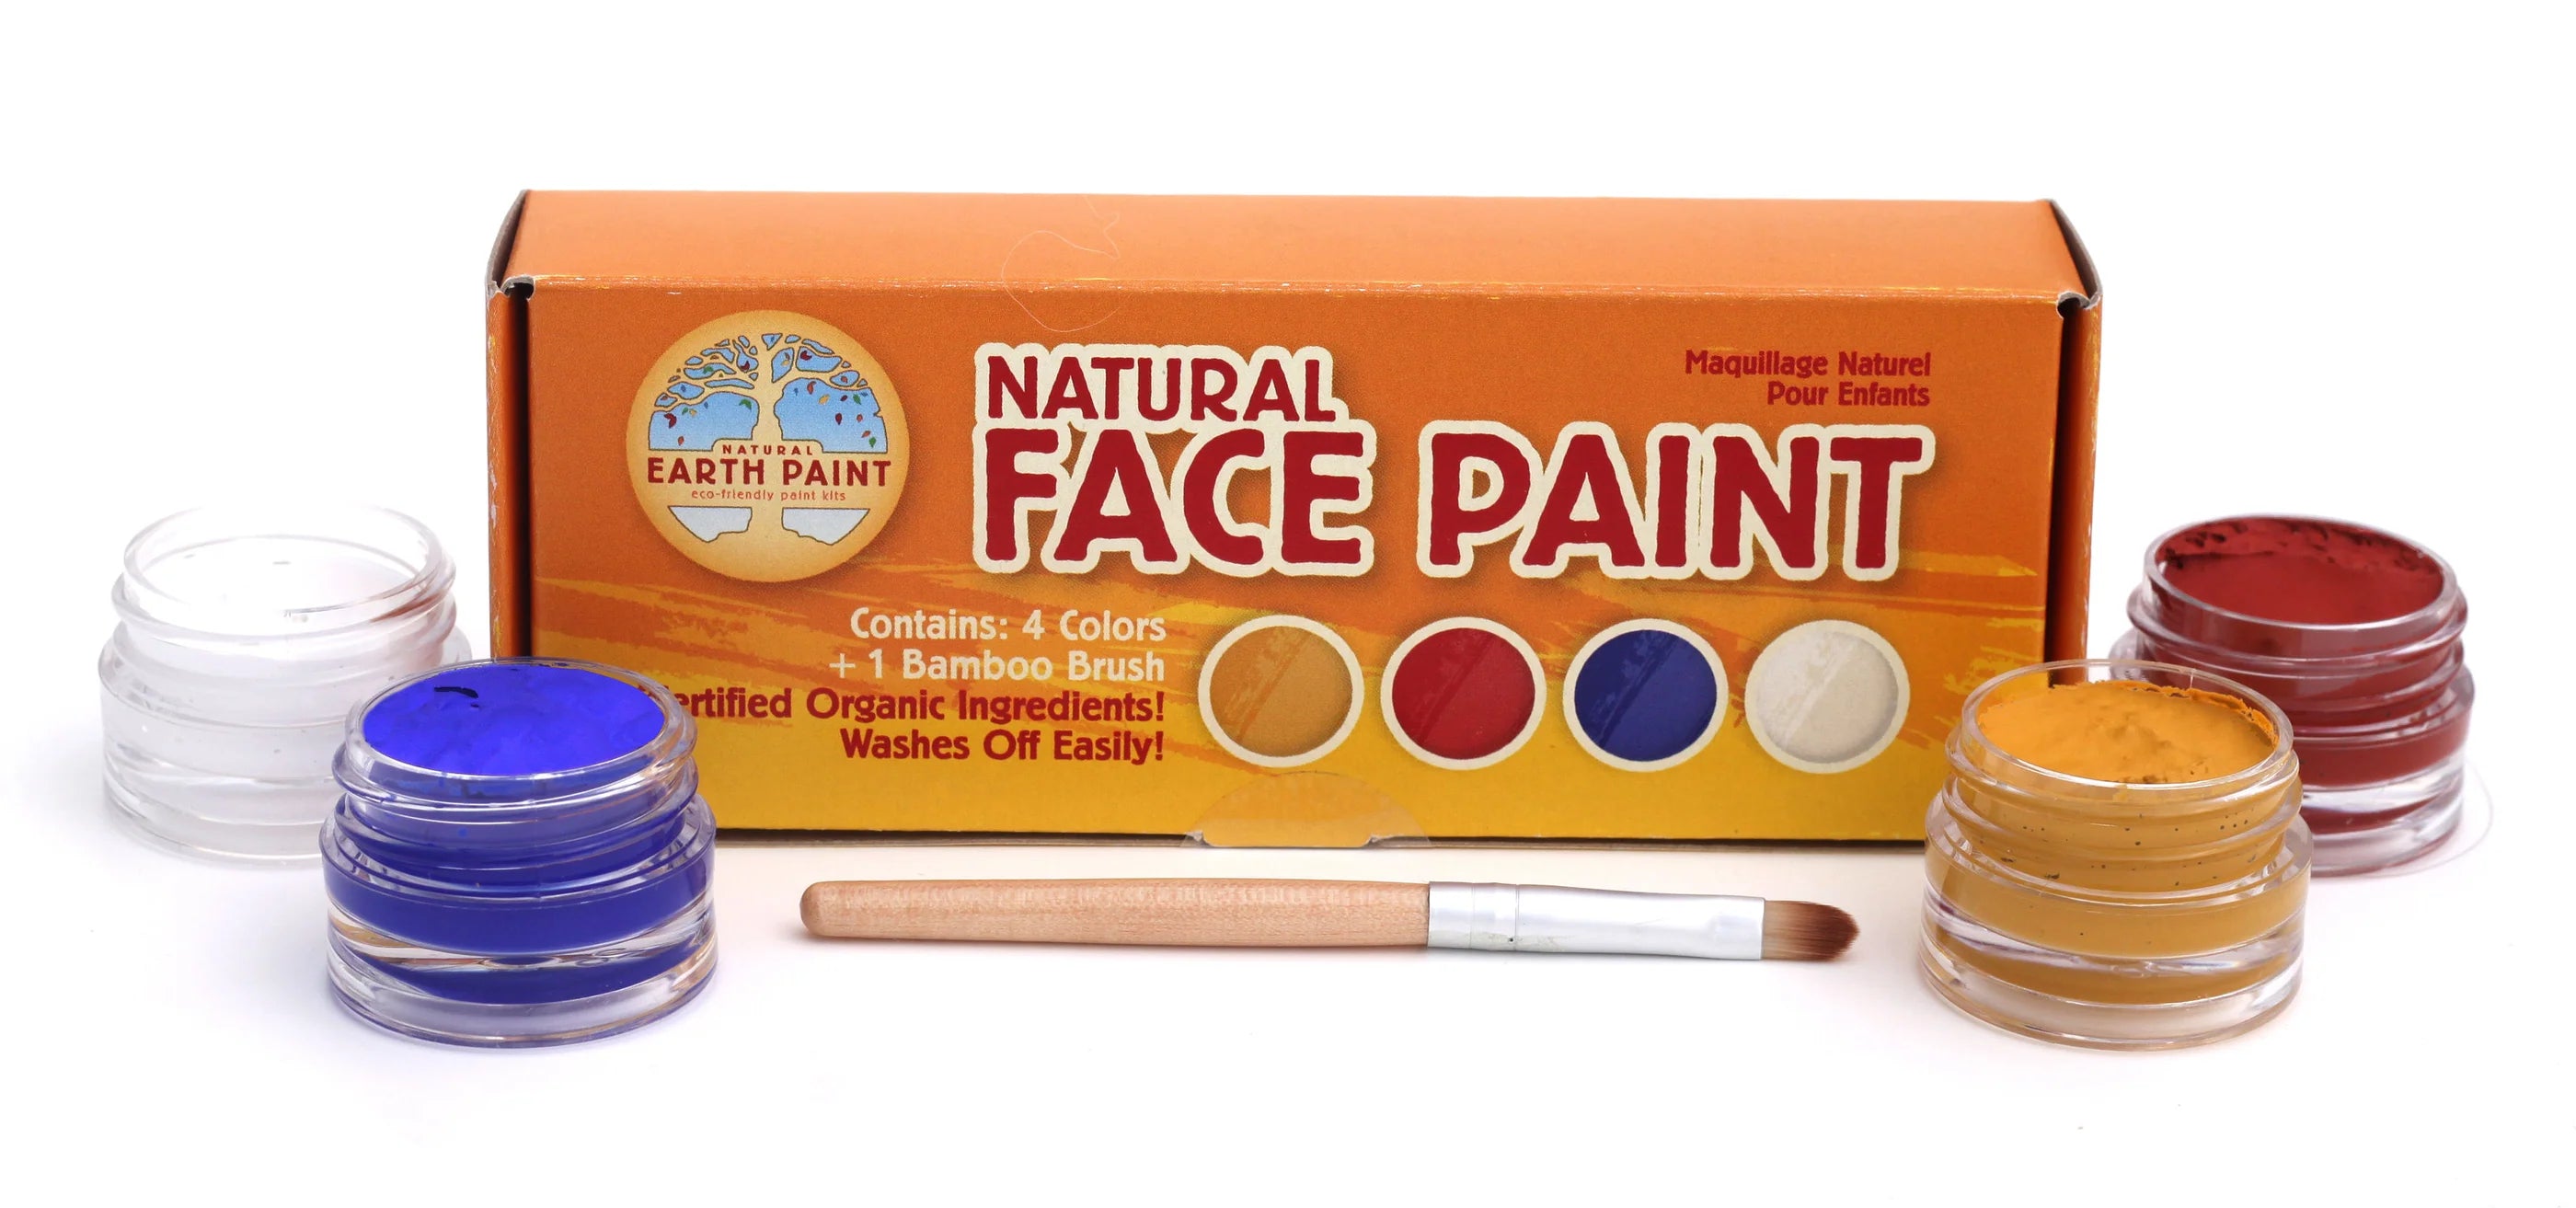 Natural Earth Paint   Maquillage naturel